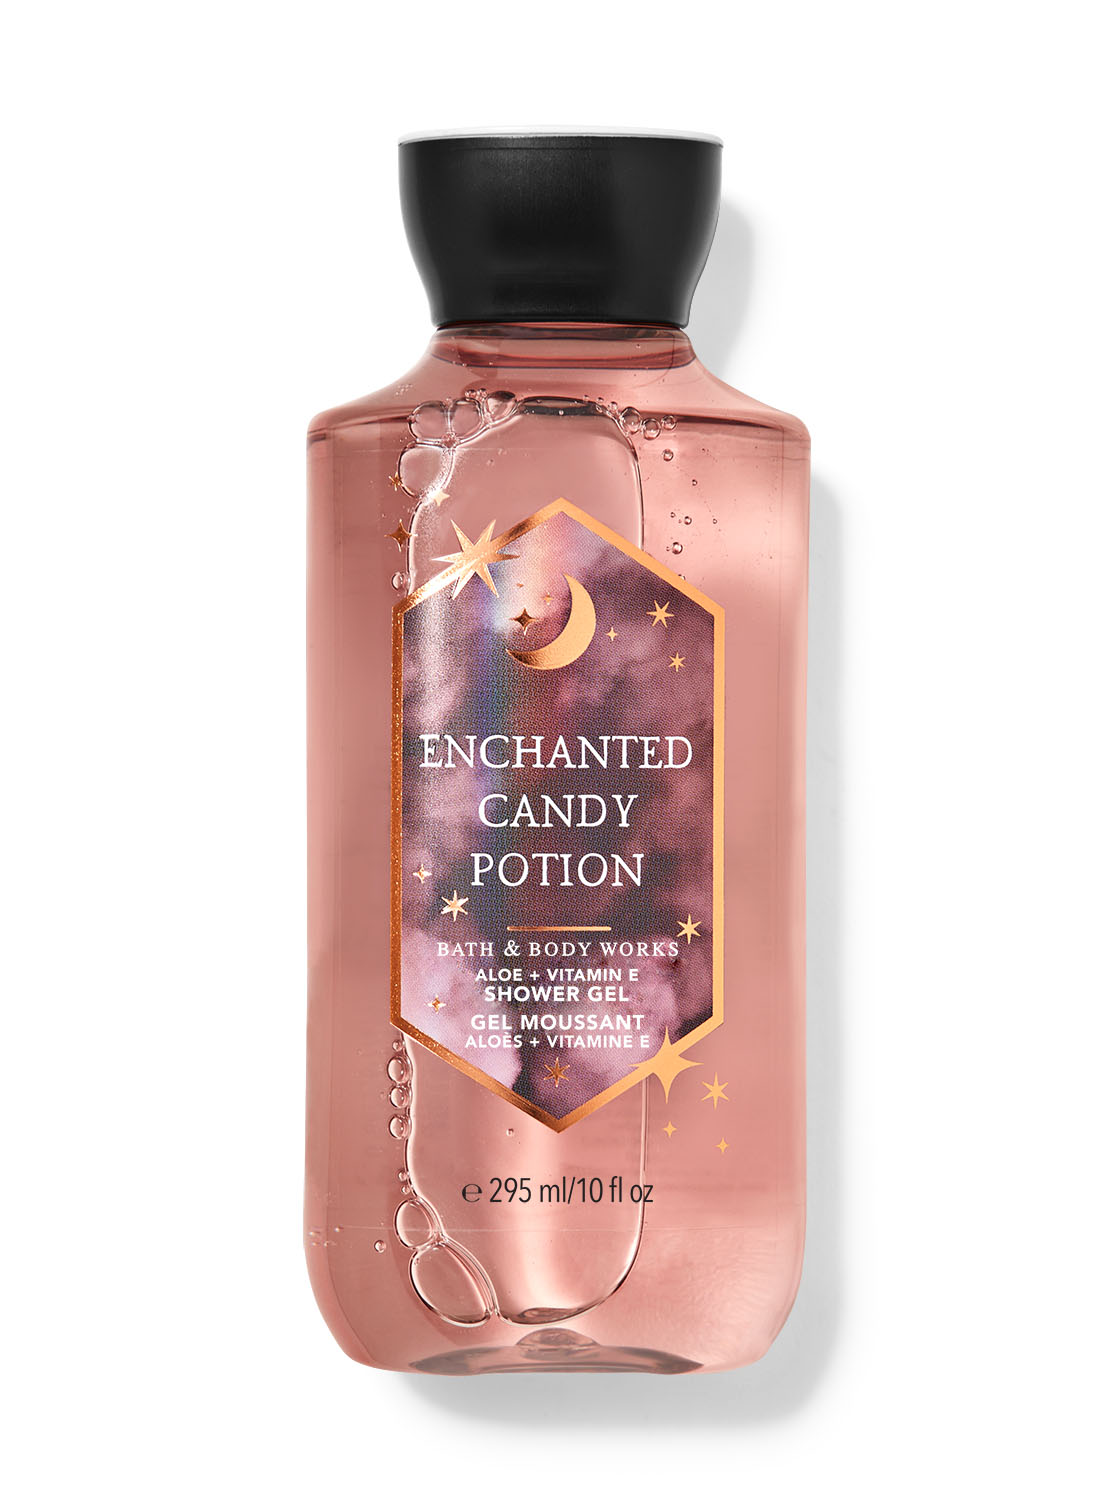 Enchanted Candy Potion Shower Gel Bath and Body Works